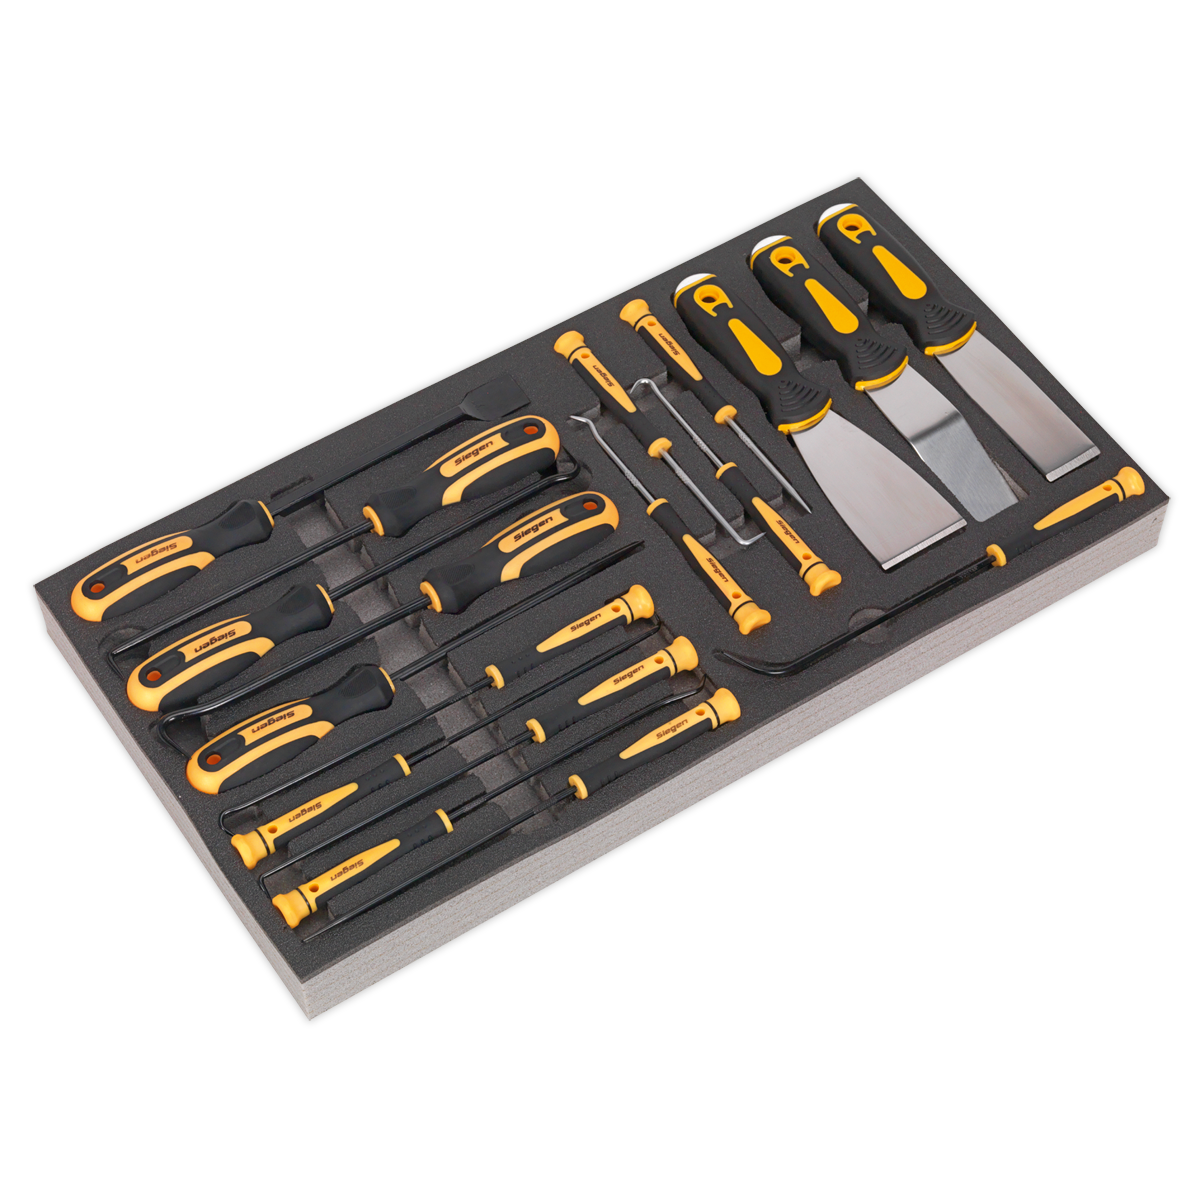 Sealey Tool Tray with Hook & Scraper Set 18pc